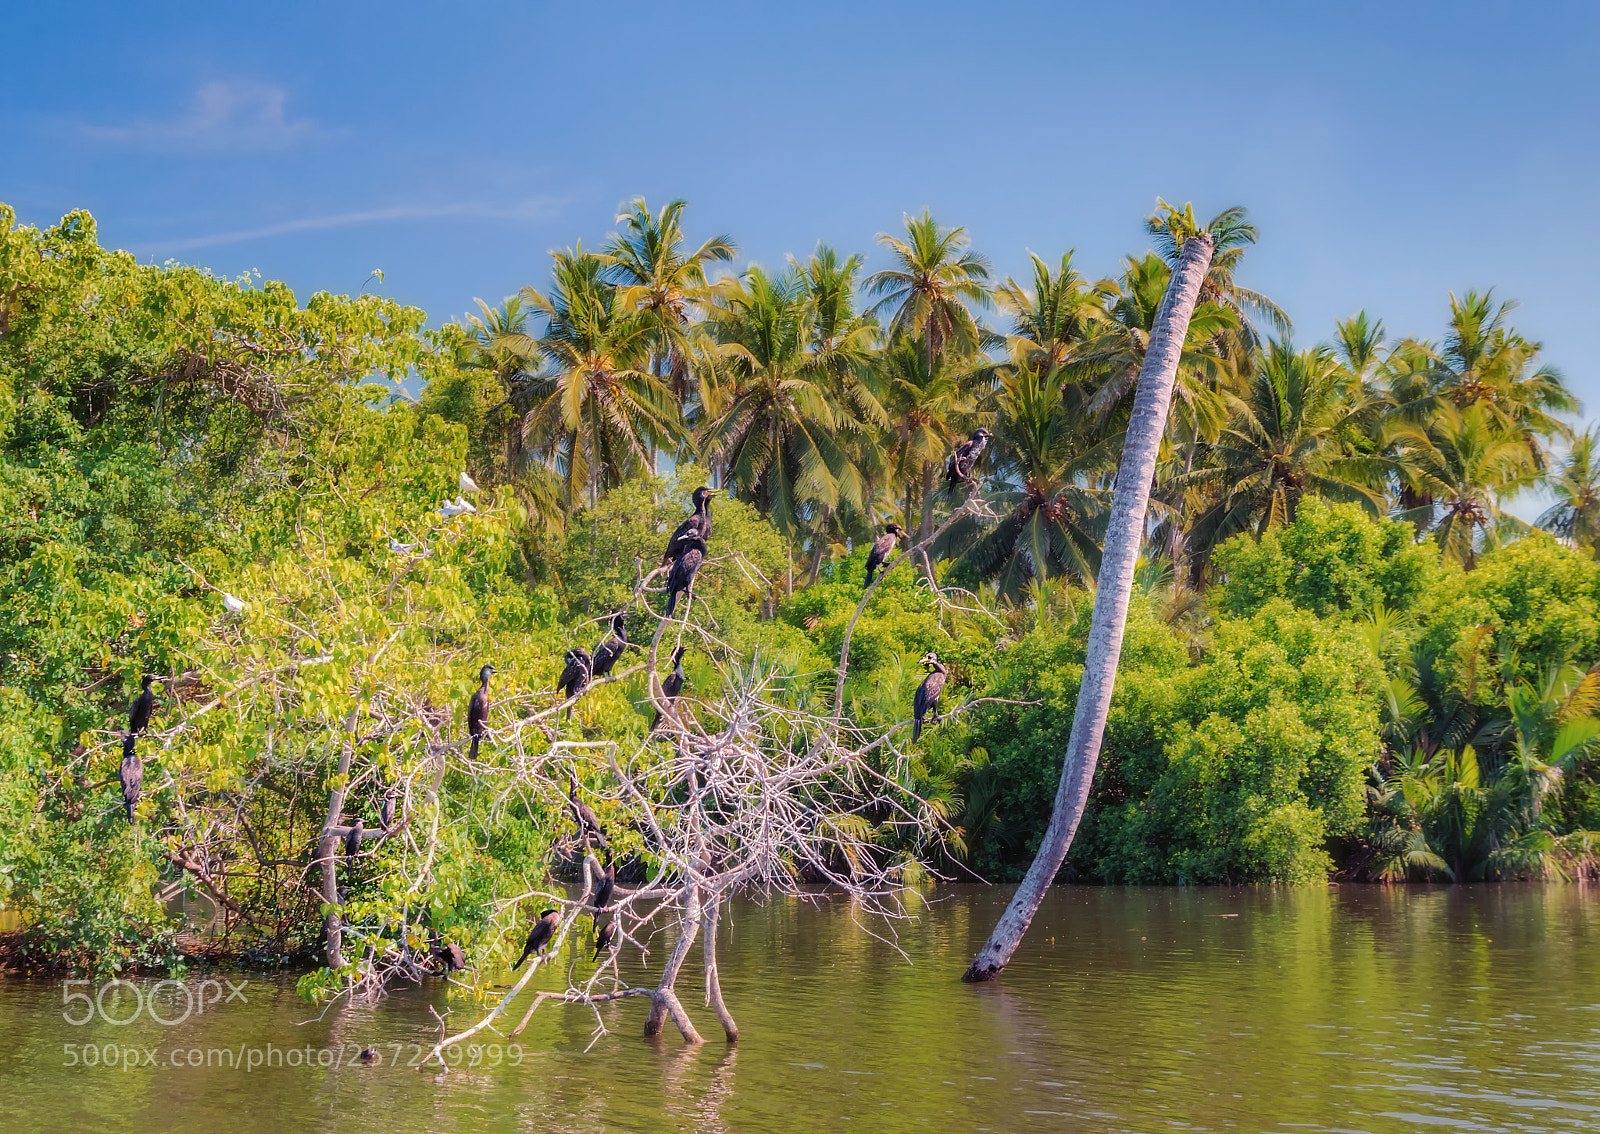 Pentax K-3 sample photo. Dutch canal in negombo. photography